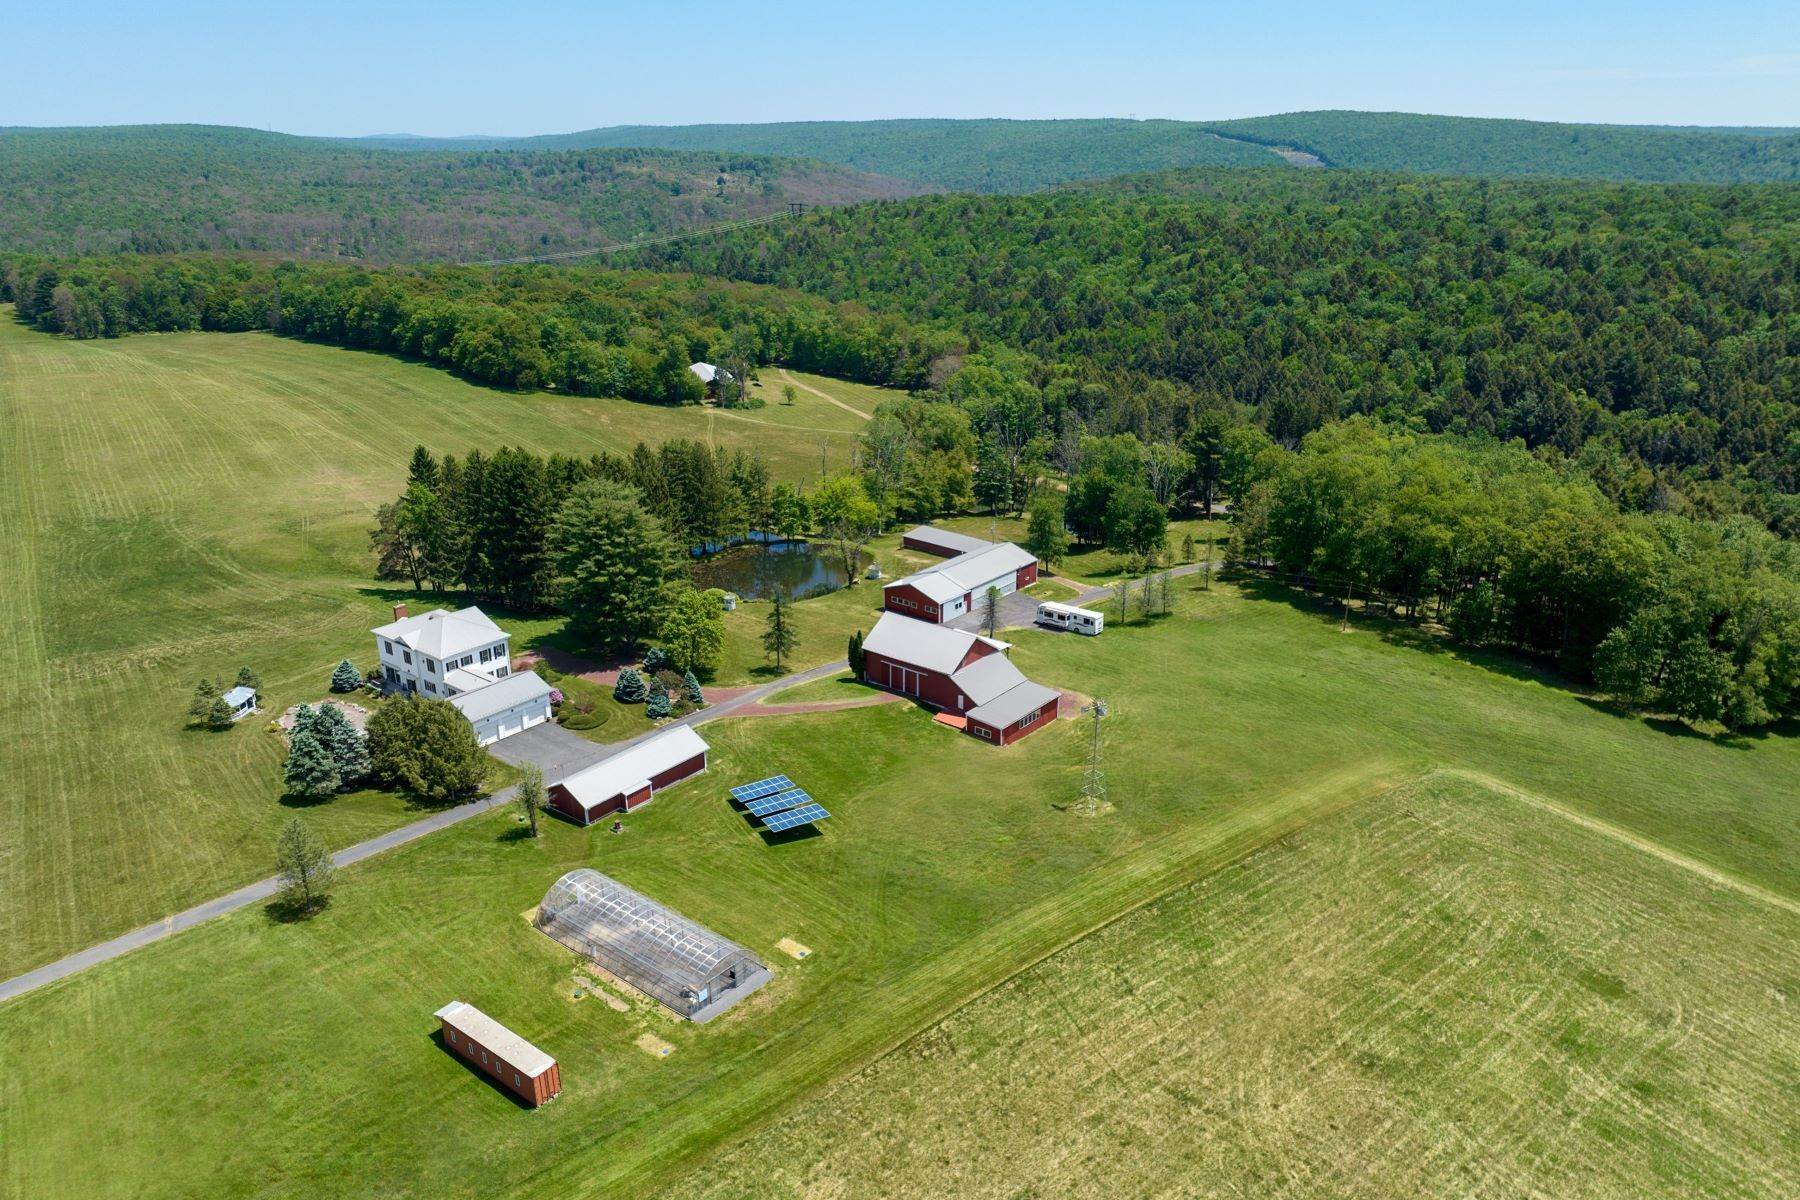 20. Farm and Ranch Properties for Sale at 207 Saw Mill Rd 207 Saw Mill Road Weatherly, Pennsylvania 18255 United States